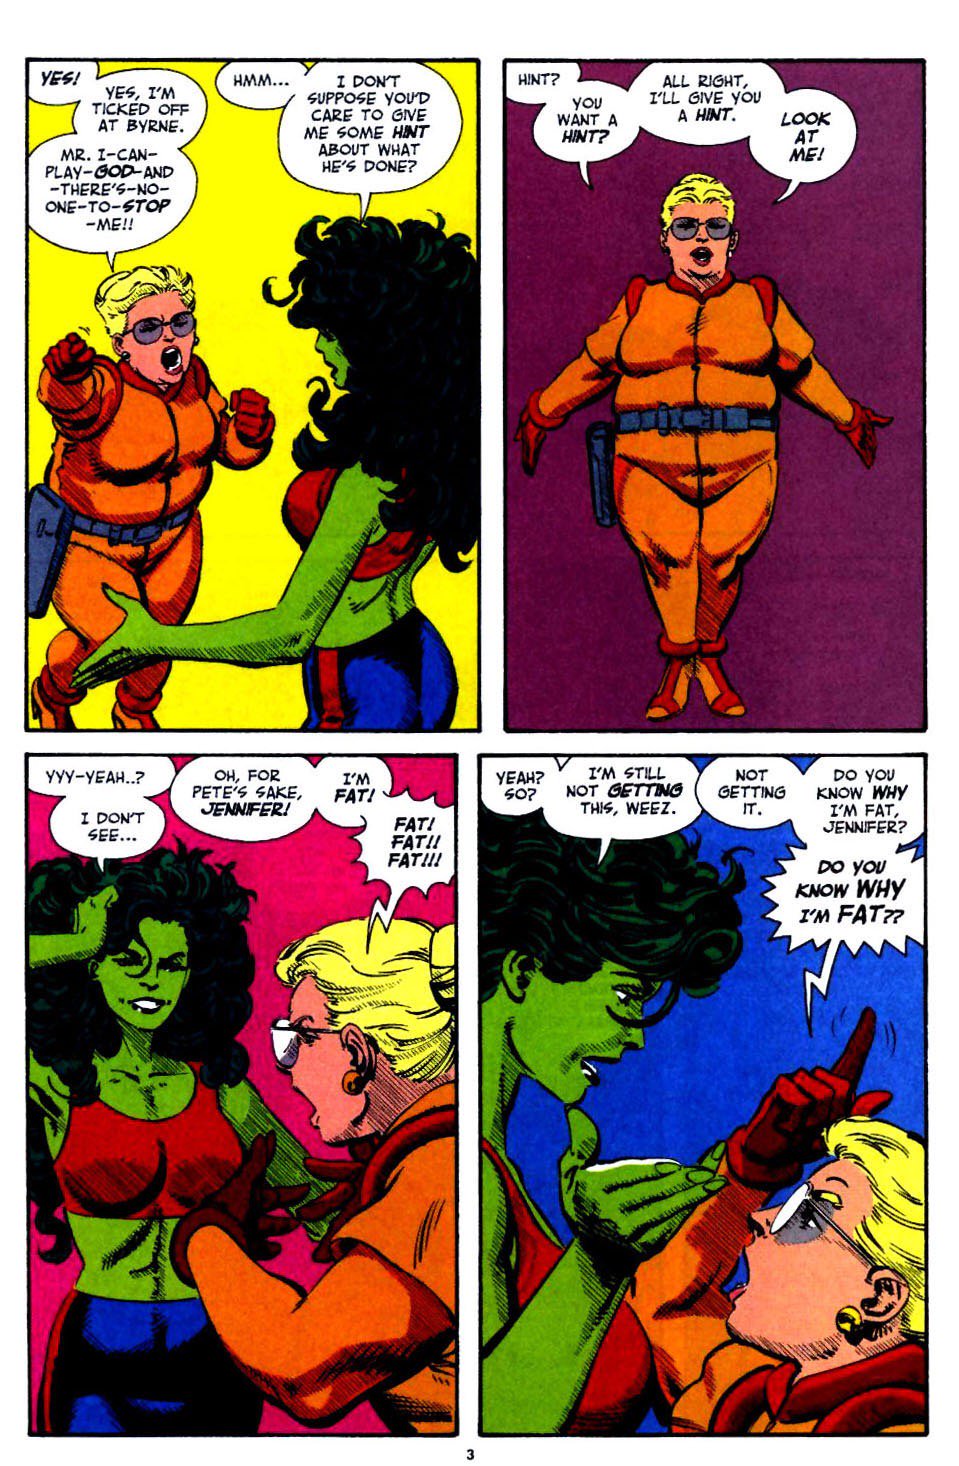 She-Hulk»: I'm done with this rubbish! - digitec